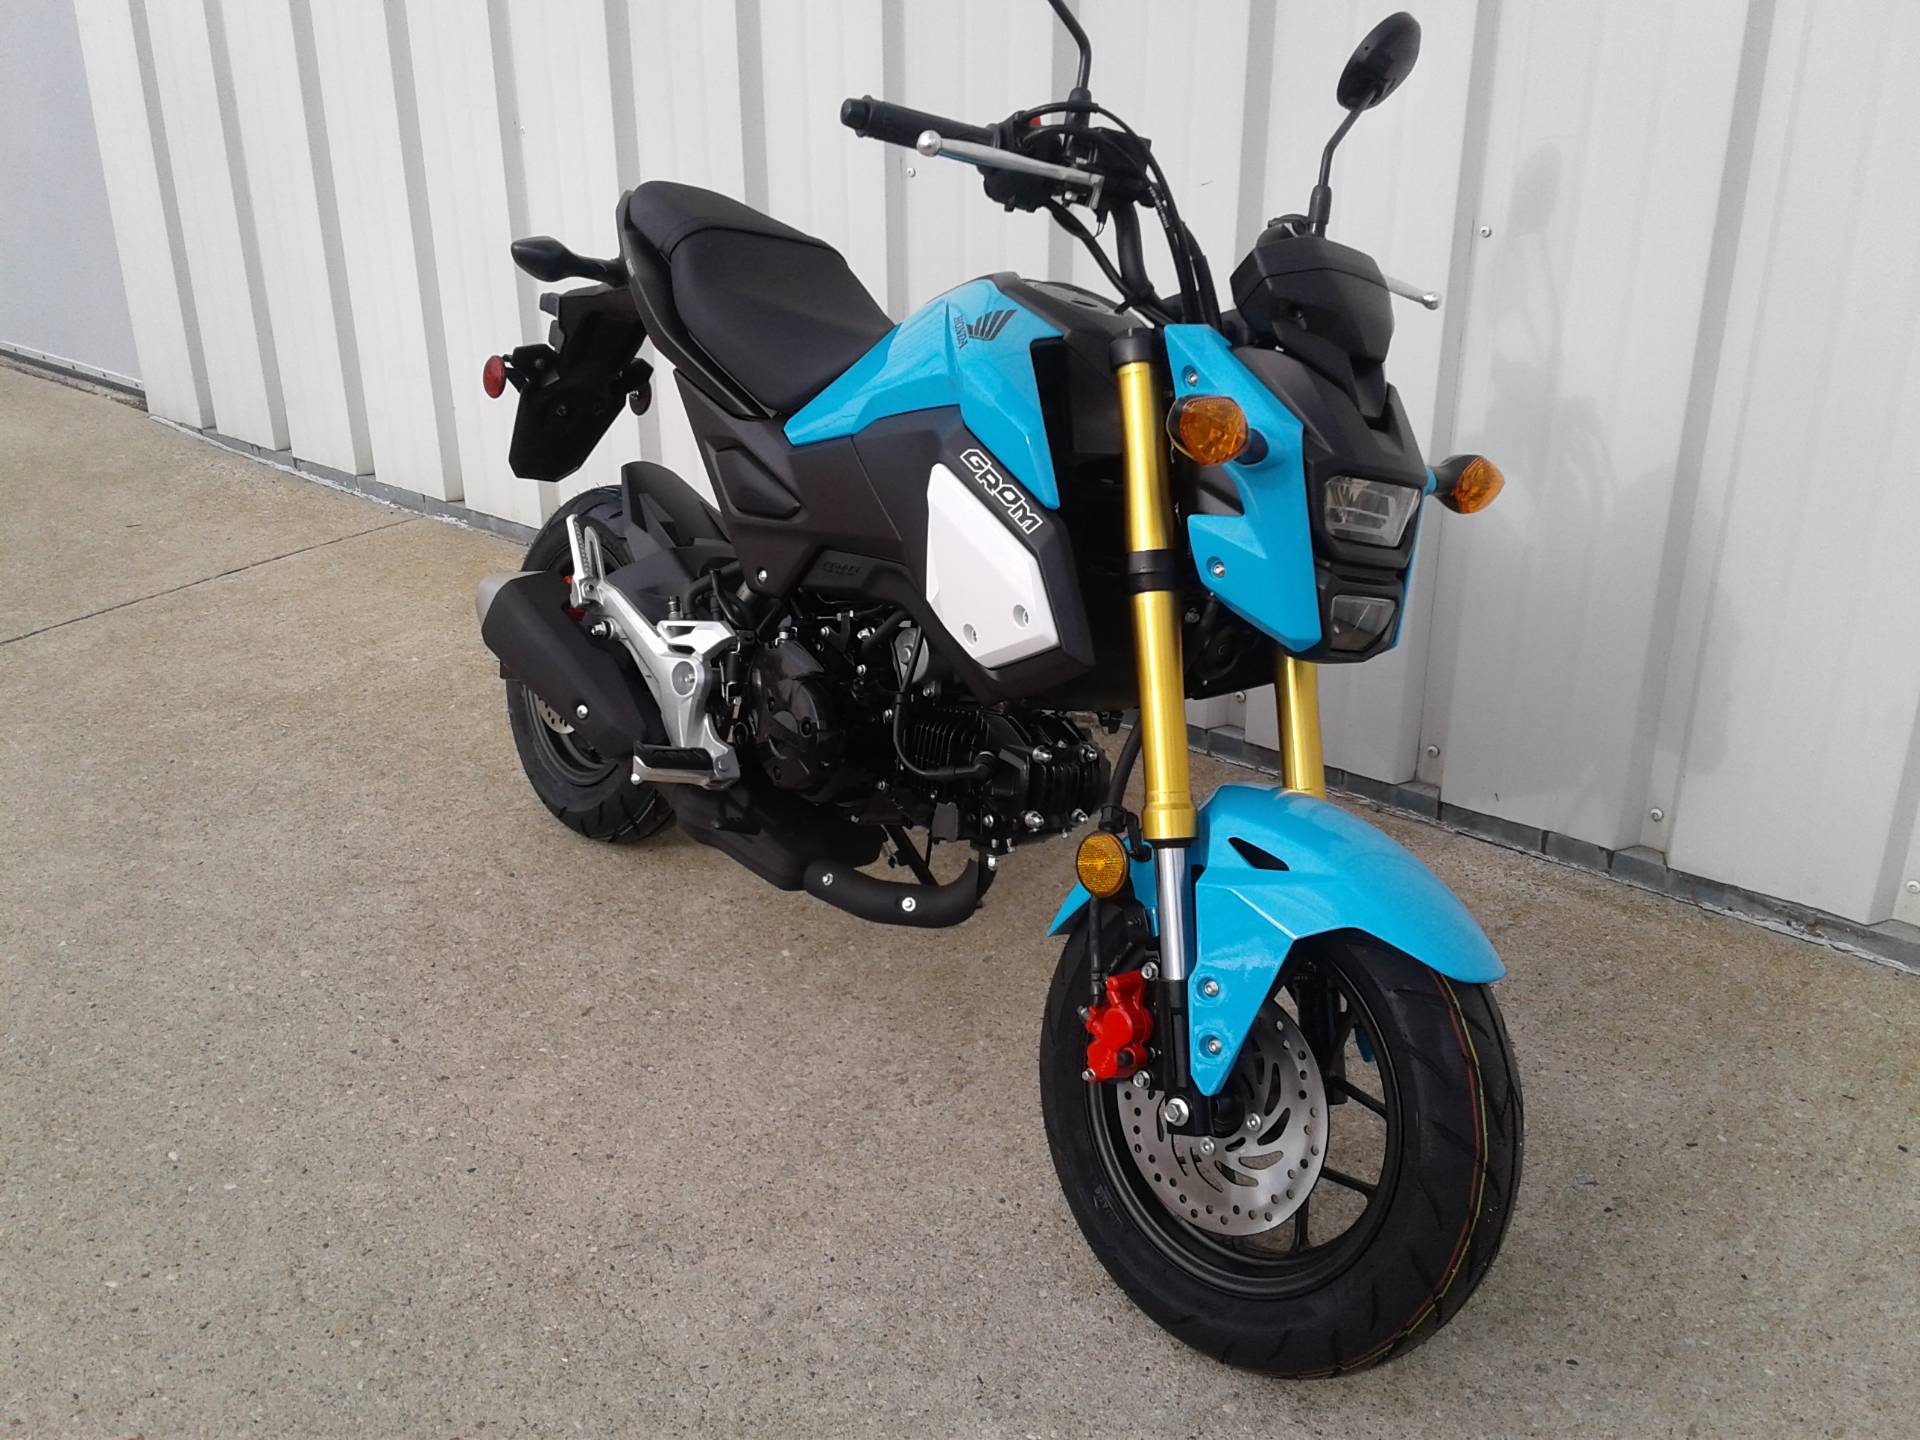 2019 Honda Grom In Manitowoc, Wisconsin - Scooter , HD Wallpaper & Backgrounds